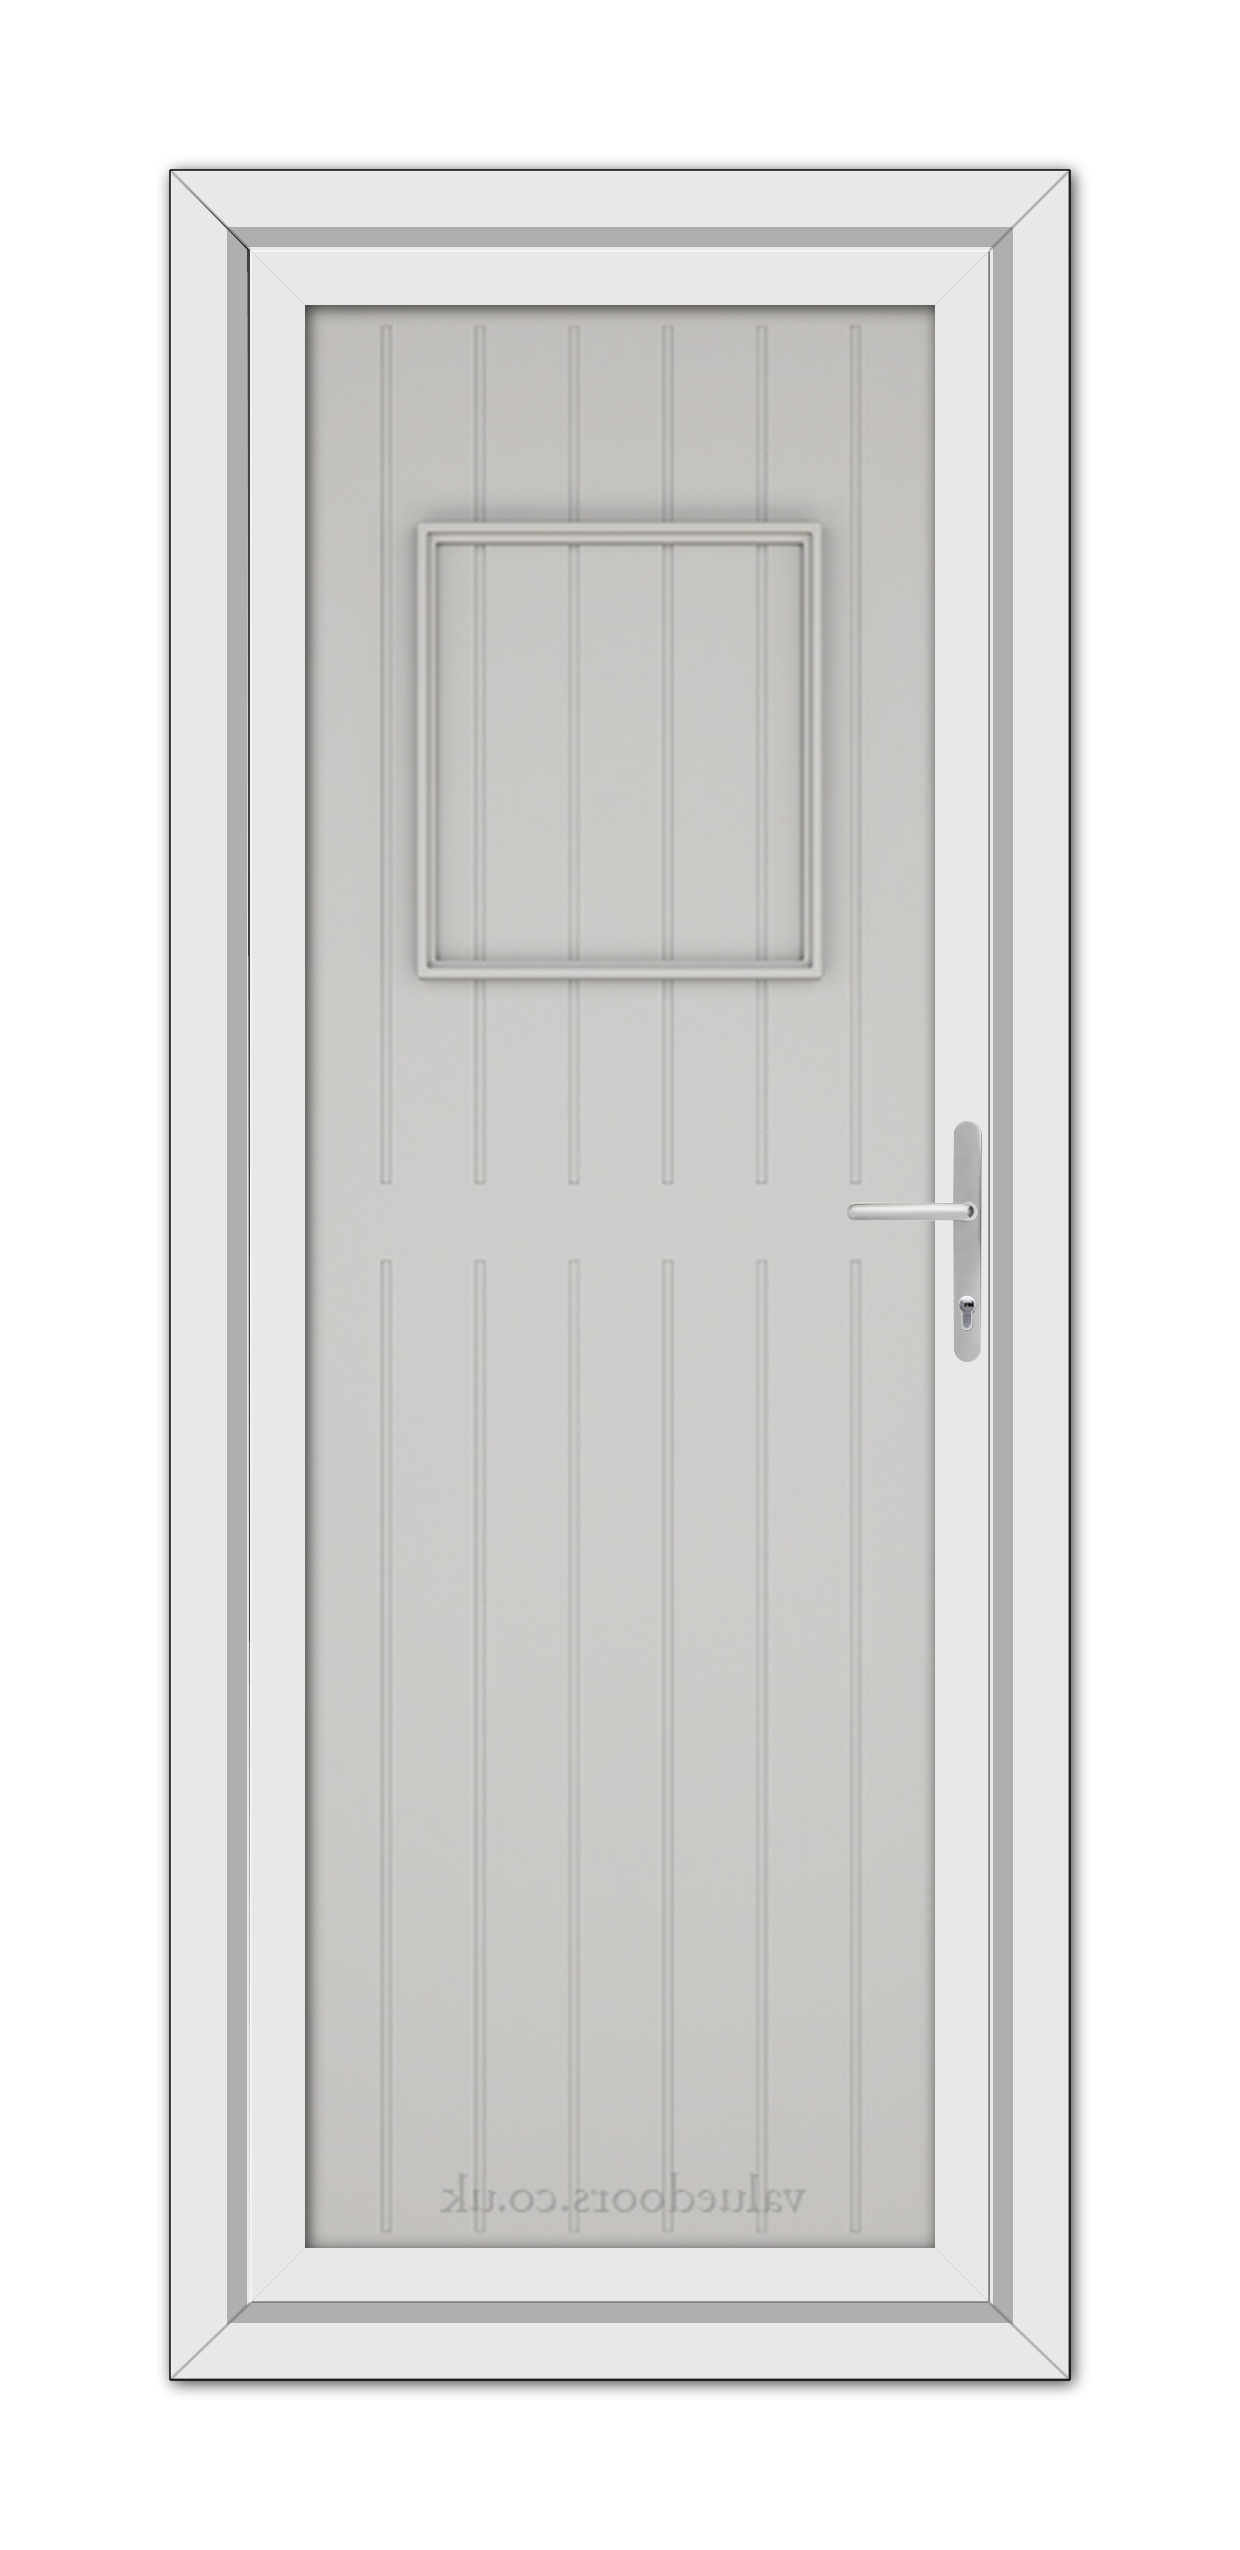 A Silver Grey Chatsworth Solid uPVC Door with a square window.